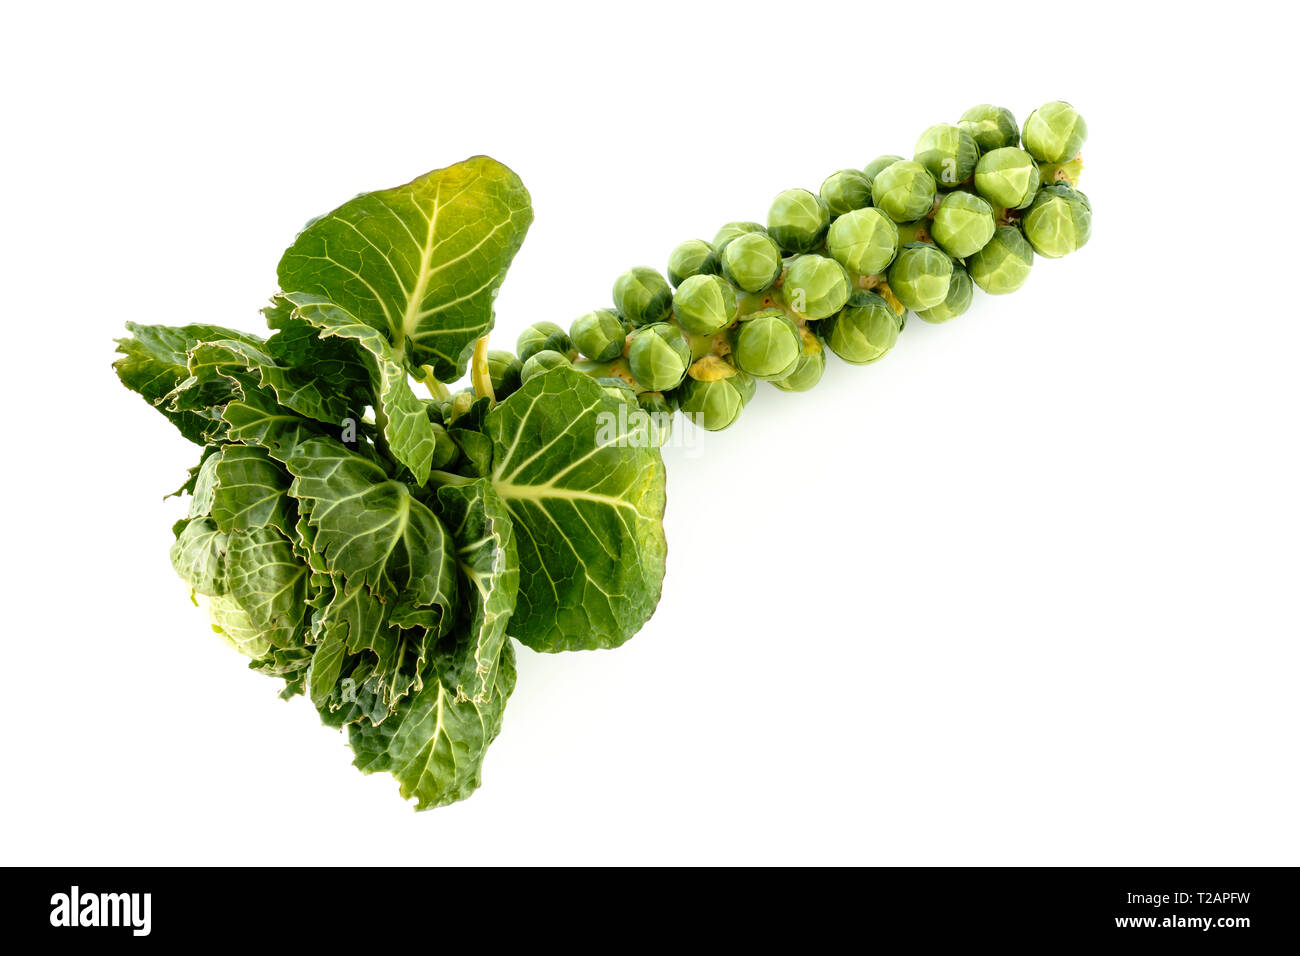 Closeup of a brussels sprouts on stalk with head and leaves isolated on white background. Stock Photo